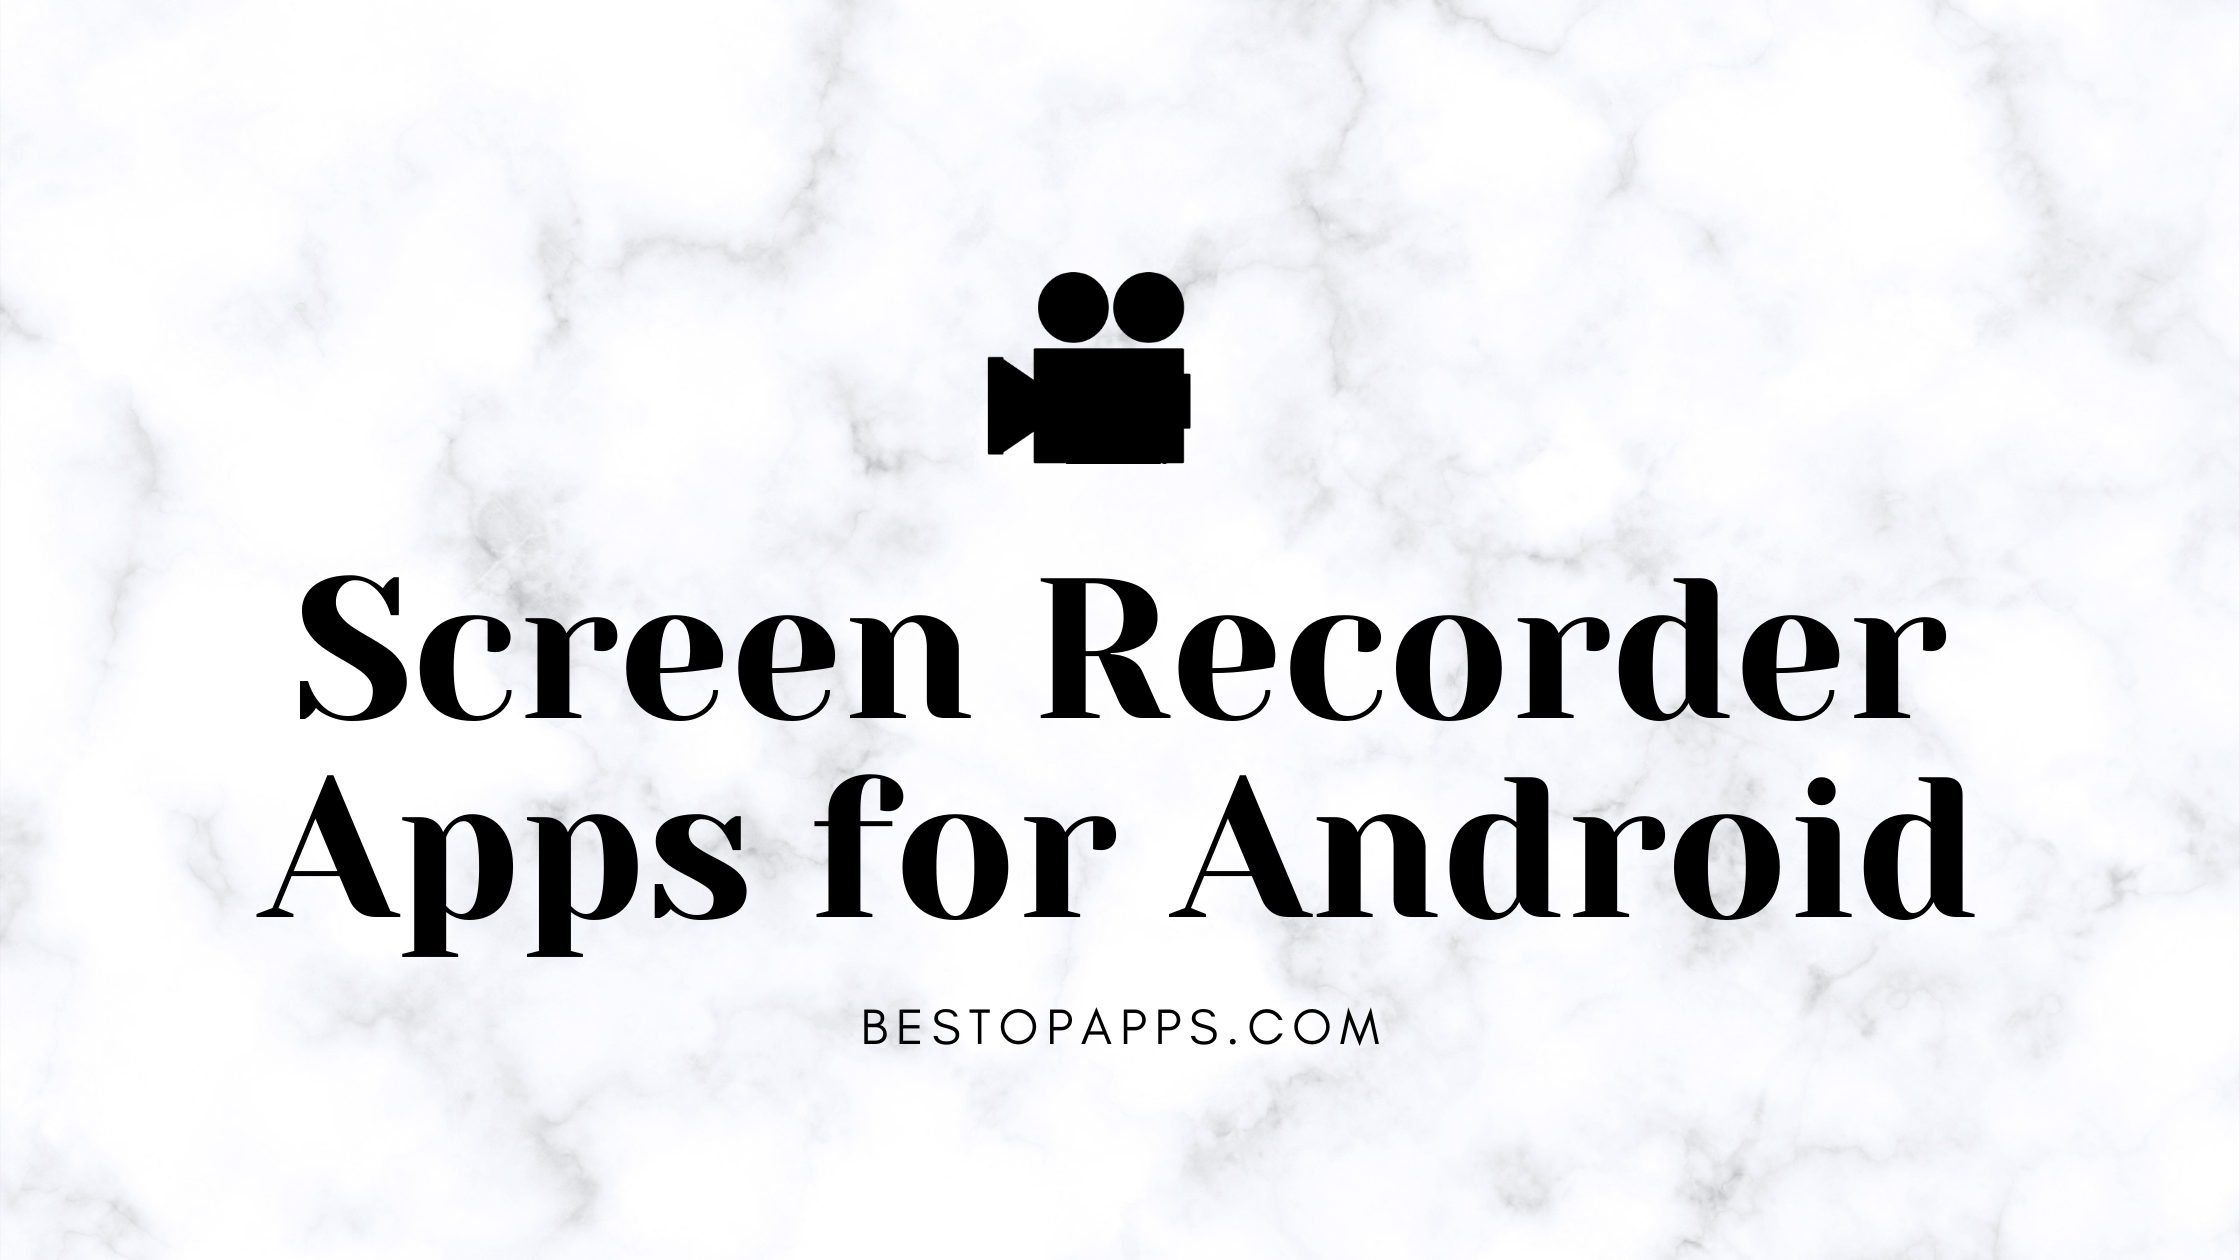 Screen Recorder Apps for Android